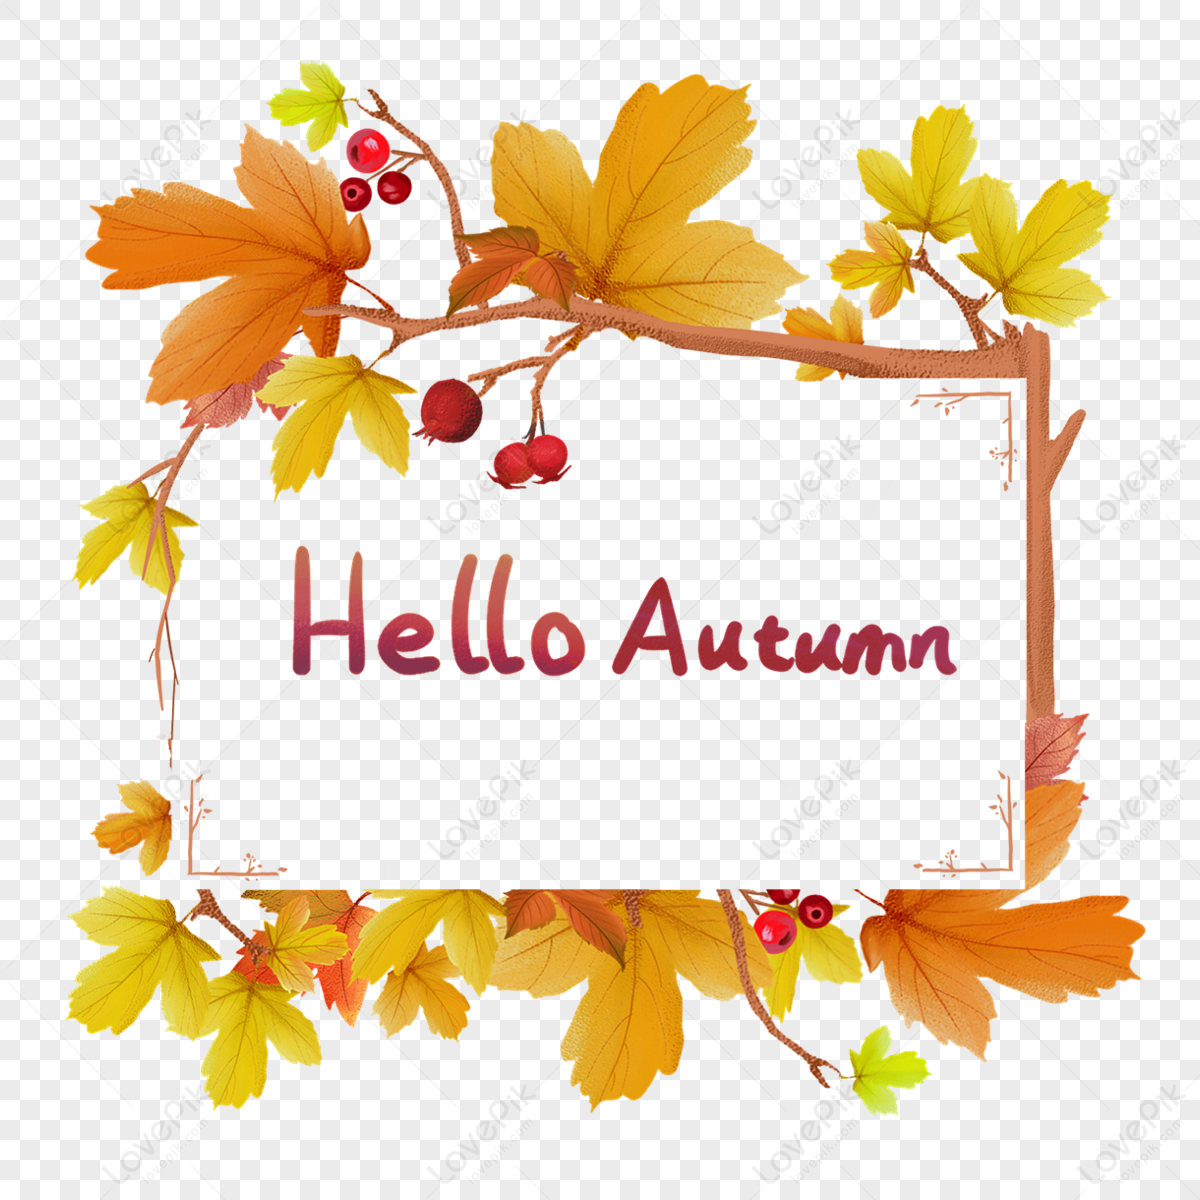 Autumn Frame PNG Images With Transparent Background